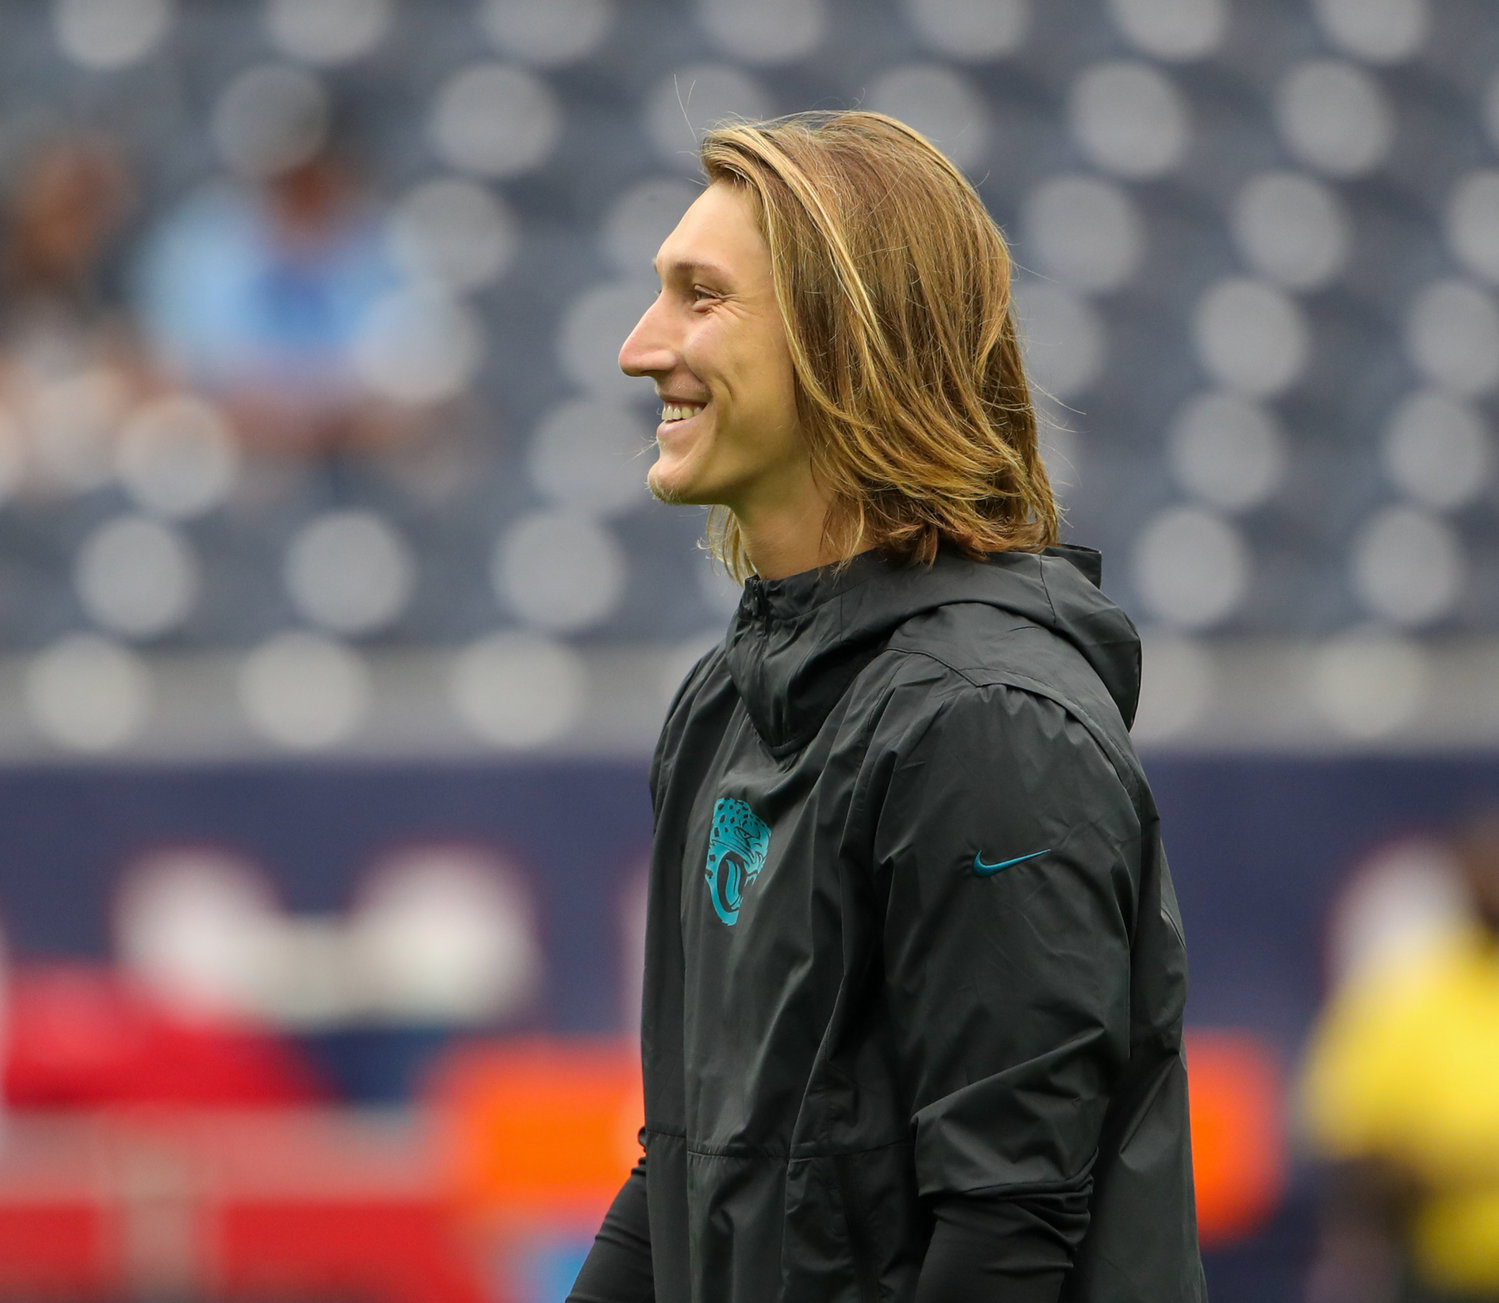 Jacksonville Jaguars quarterback Trevor Lawrence (16) warms up before the start of an NFL game between the Houston Texans and the Jacksonville Jaguars on September 12, 2021 in Houston, Texas.